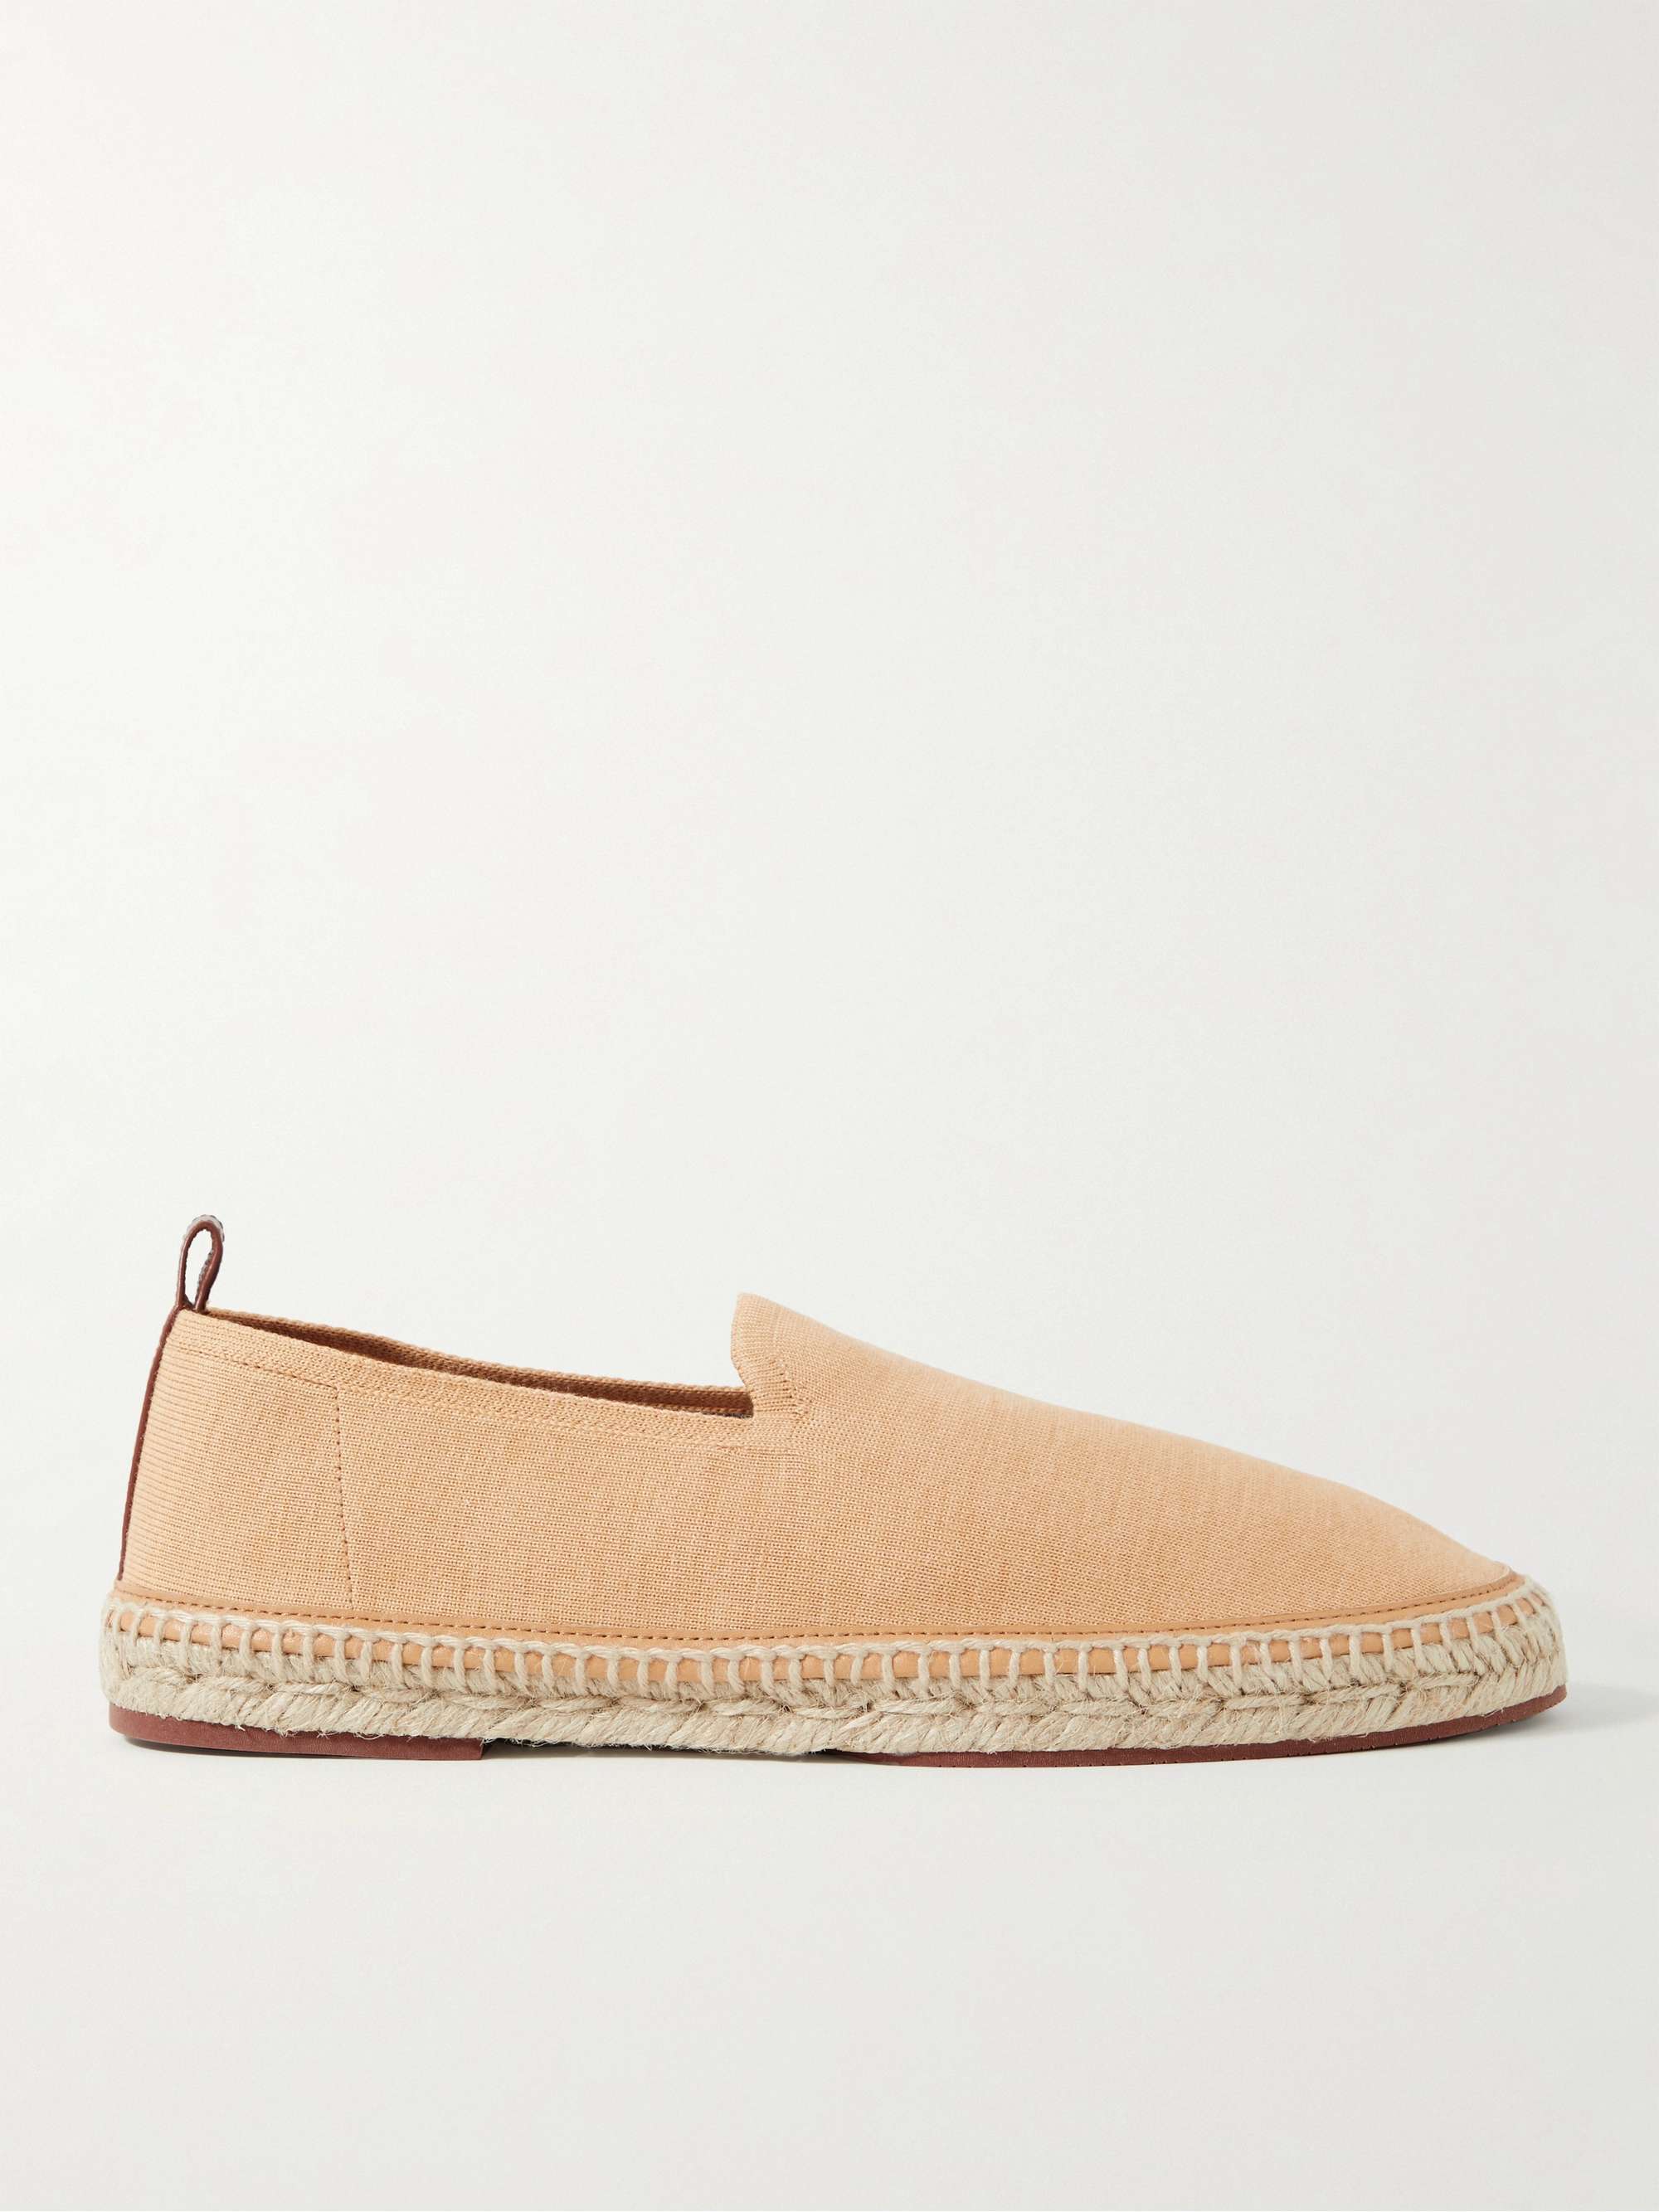 LORO PIANA Seaside Walk Leather-Trimmed Cotton and Silk-Blend Espadrilles